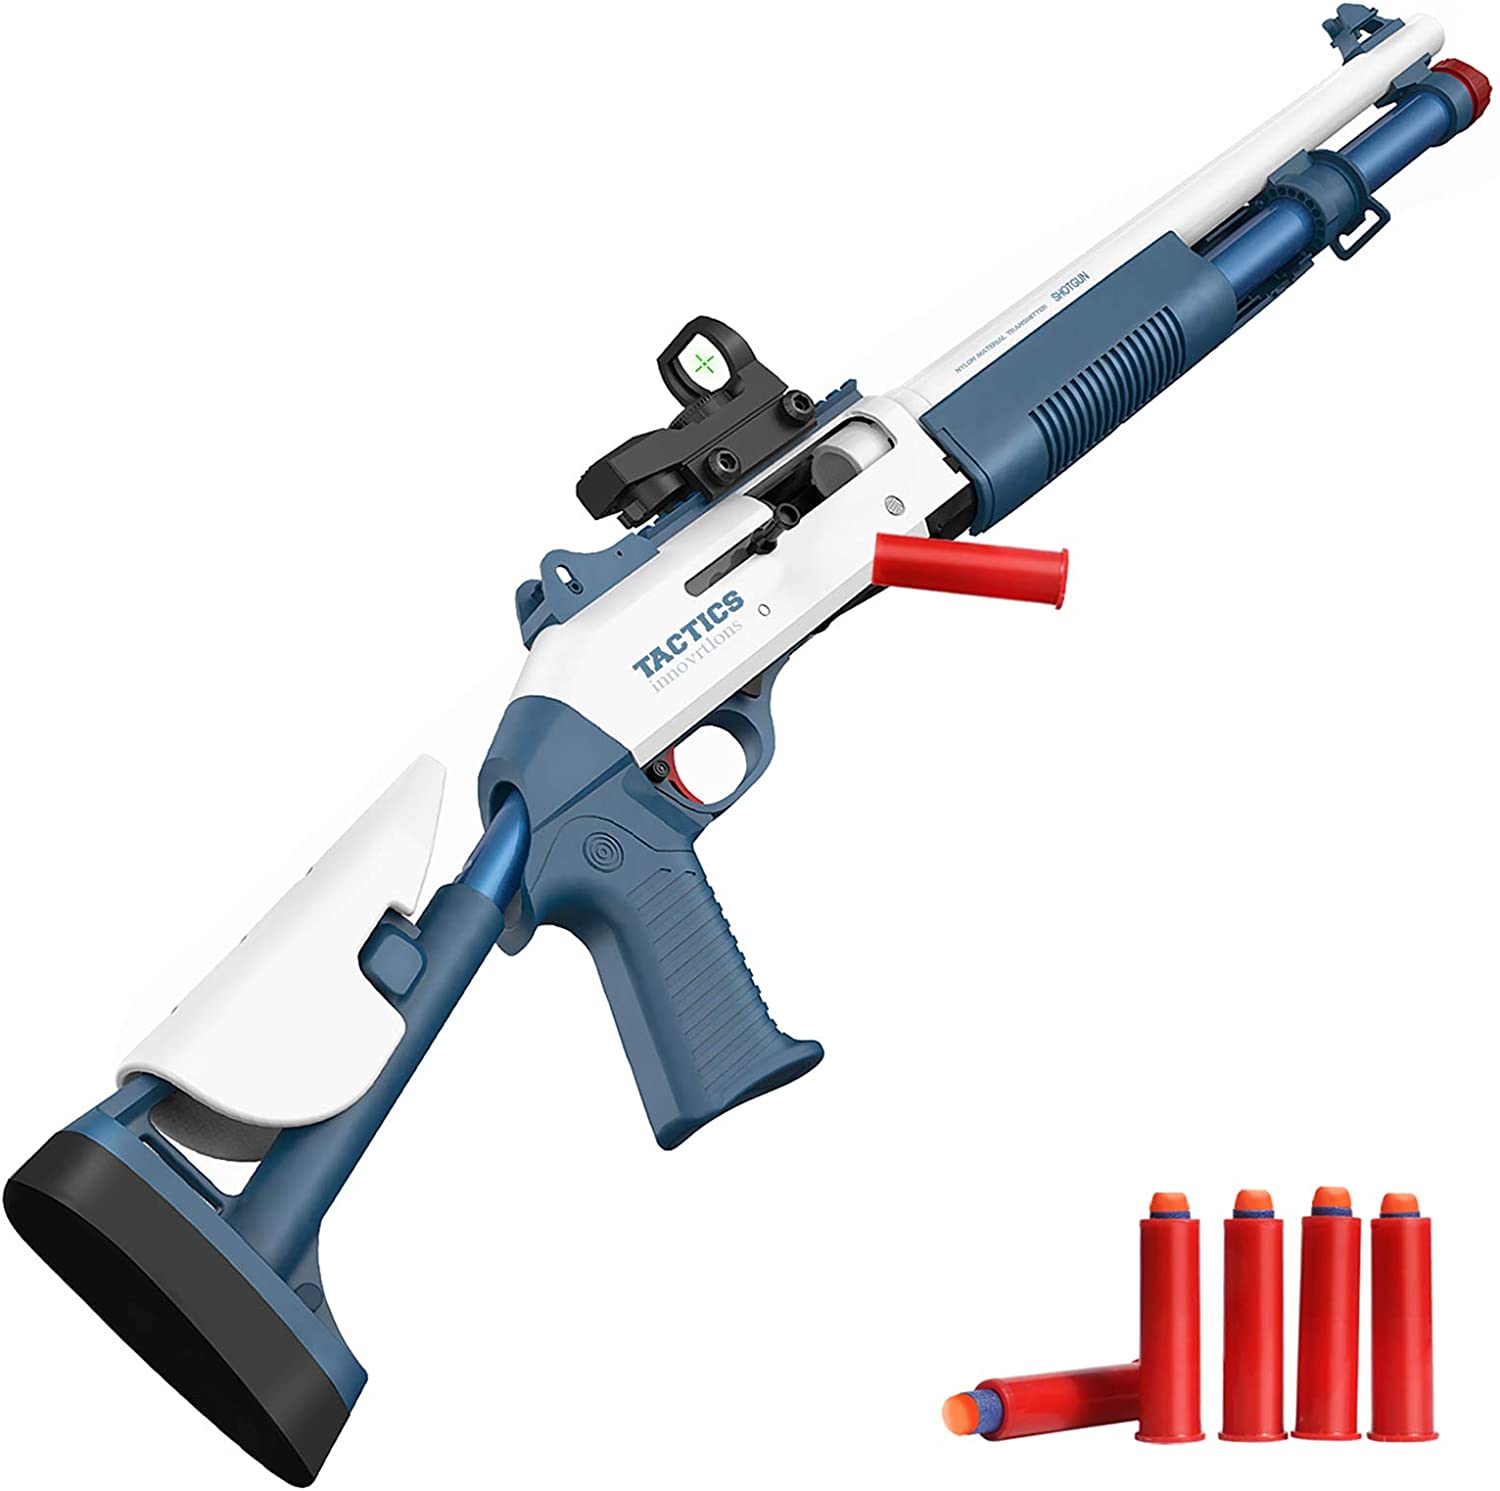  Semour Toy Guns Automatic Sniper Gun with Bullets - Toys for  Boys Kids Age 6-12, Christmas Birthday Gifts for Kids, Toy Foam Blasters &  Guns, Blue : Toys & Games